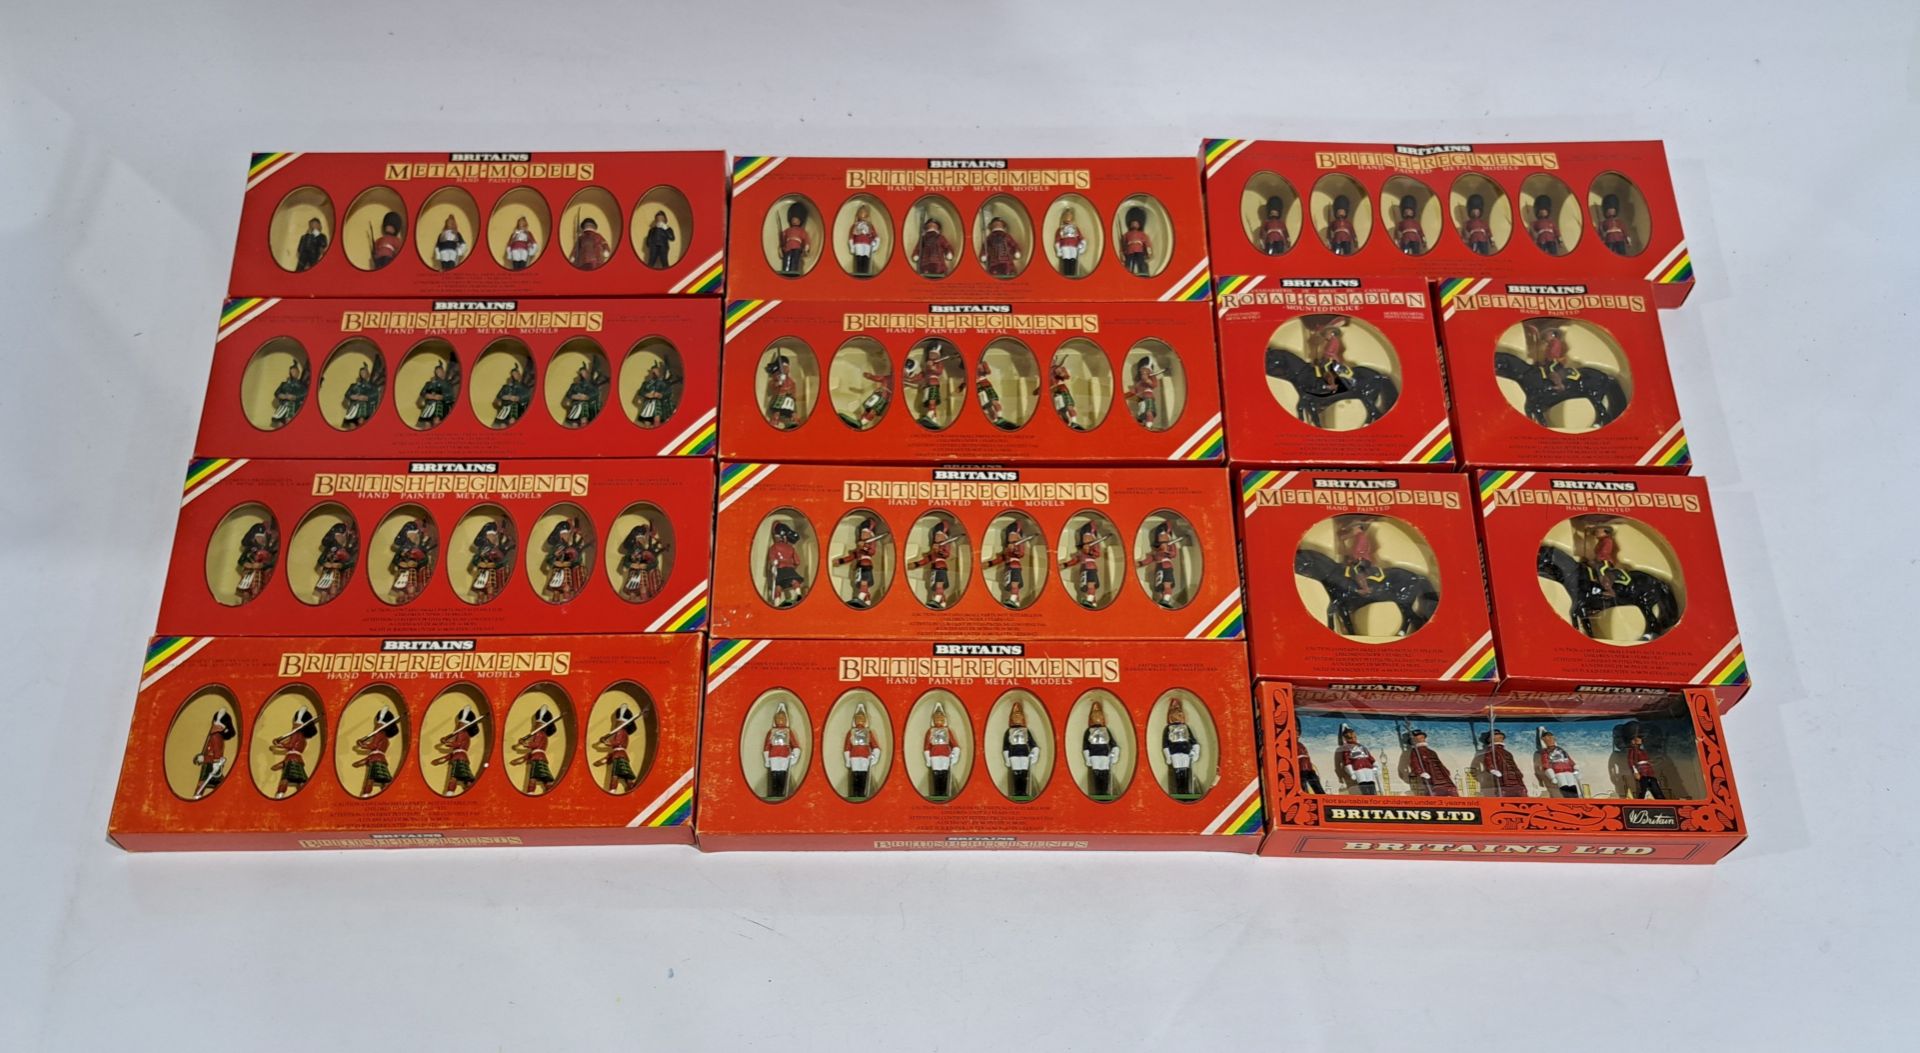 Britains British Regiments Metal Models & Corgi Collectible Icon Figures, a boxed group - Image 2 of 3